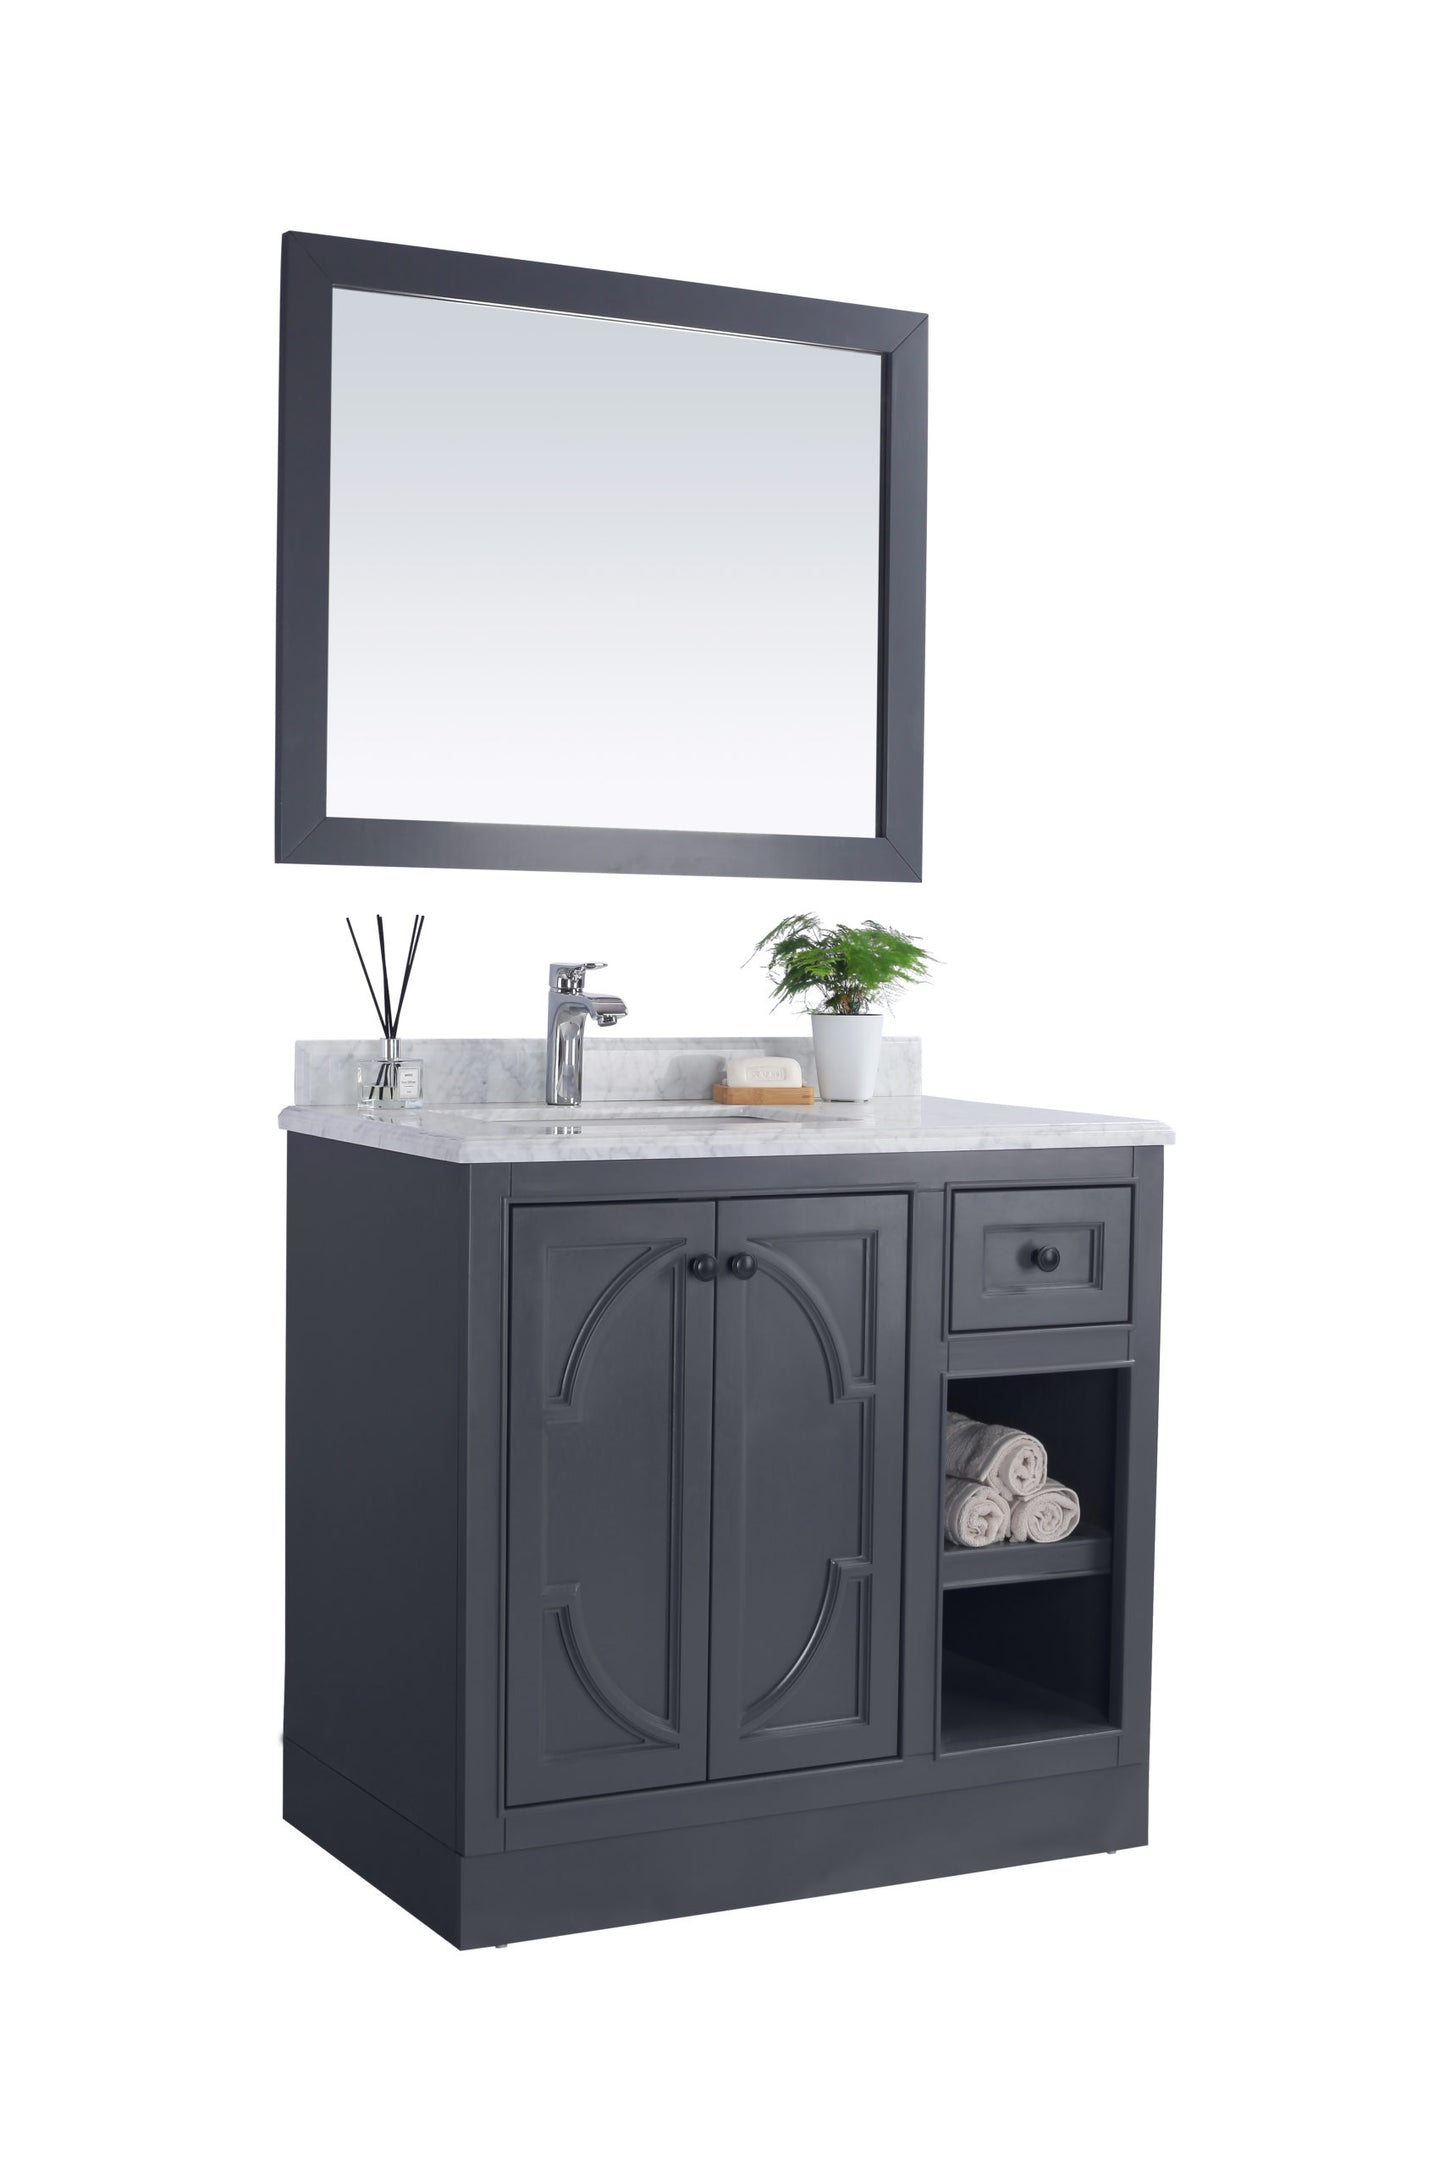 Odyssey 36" Maple Grey Bathroom Vanity with White Stripes Marble Countertop